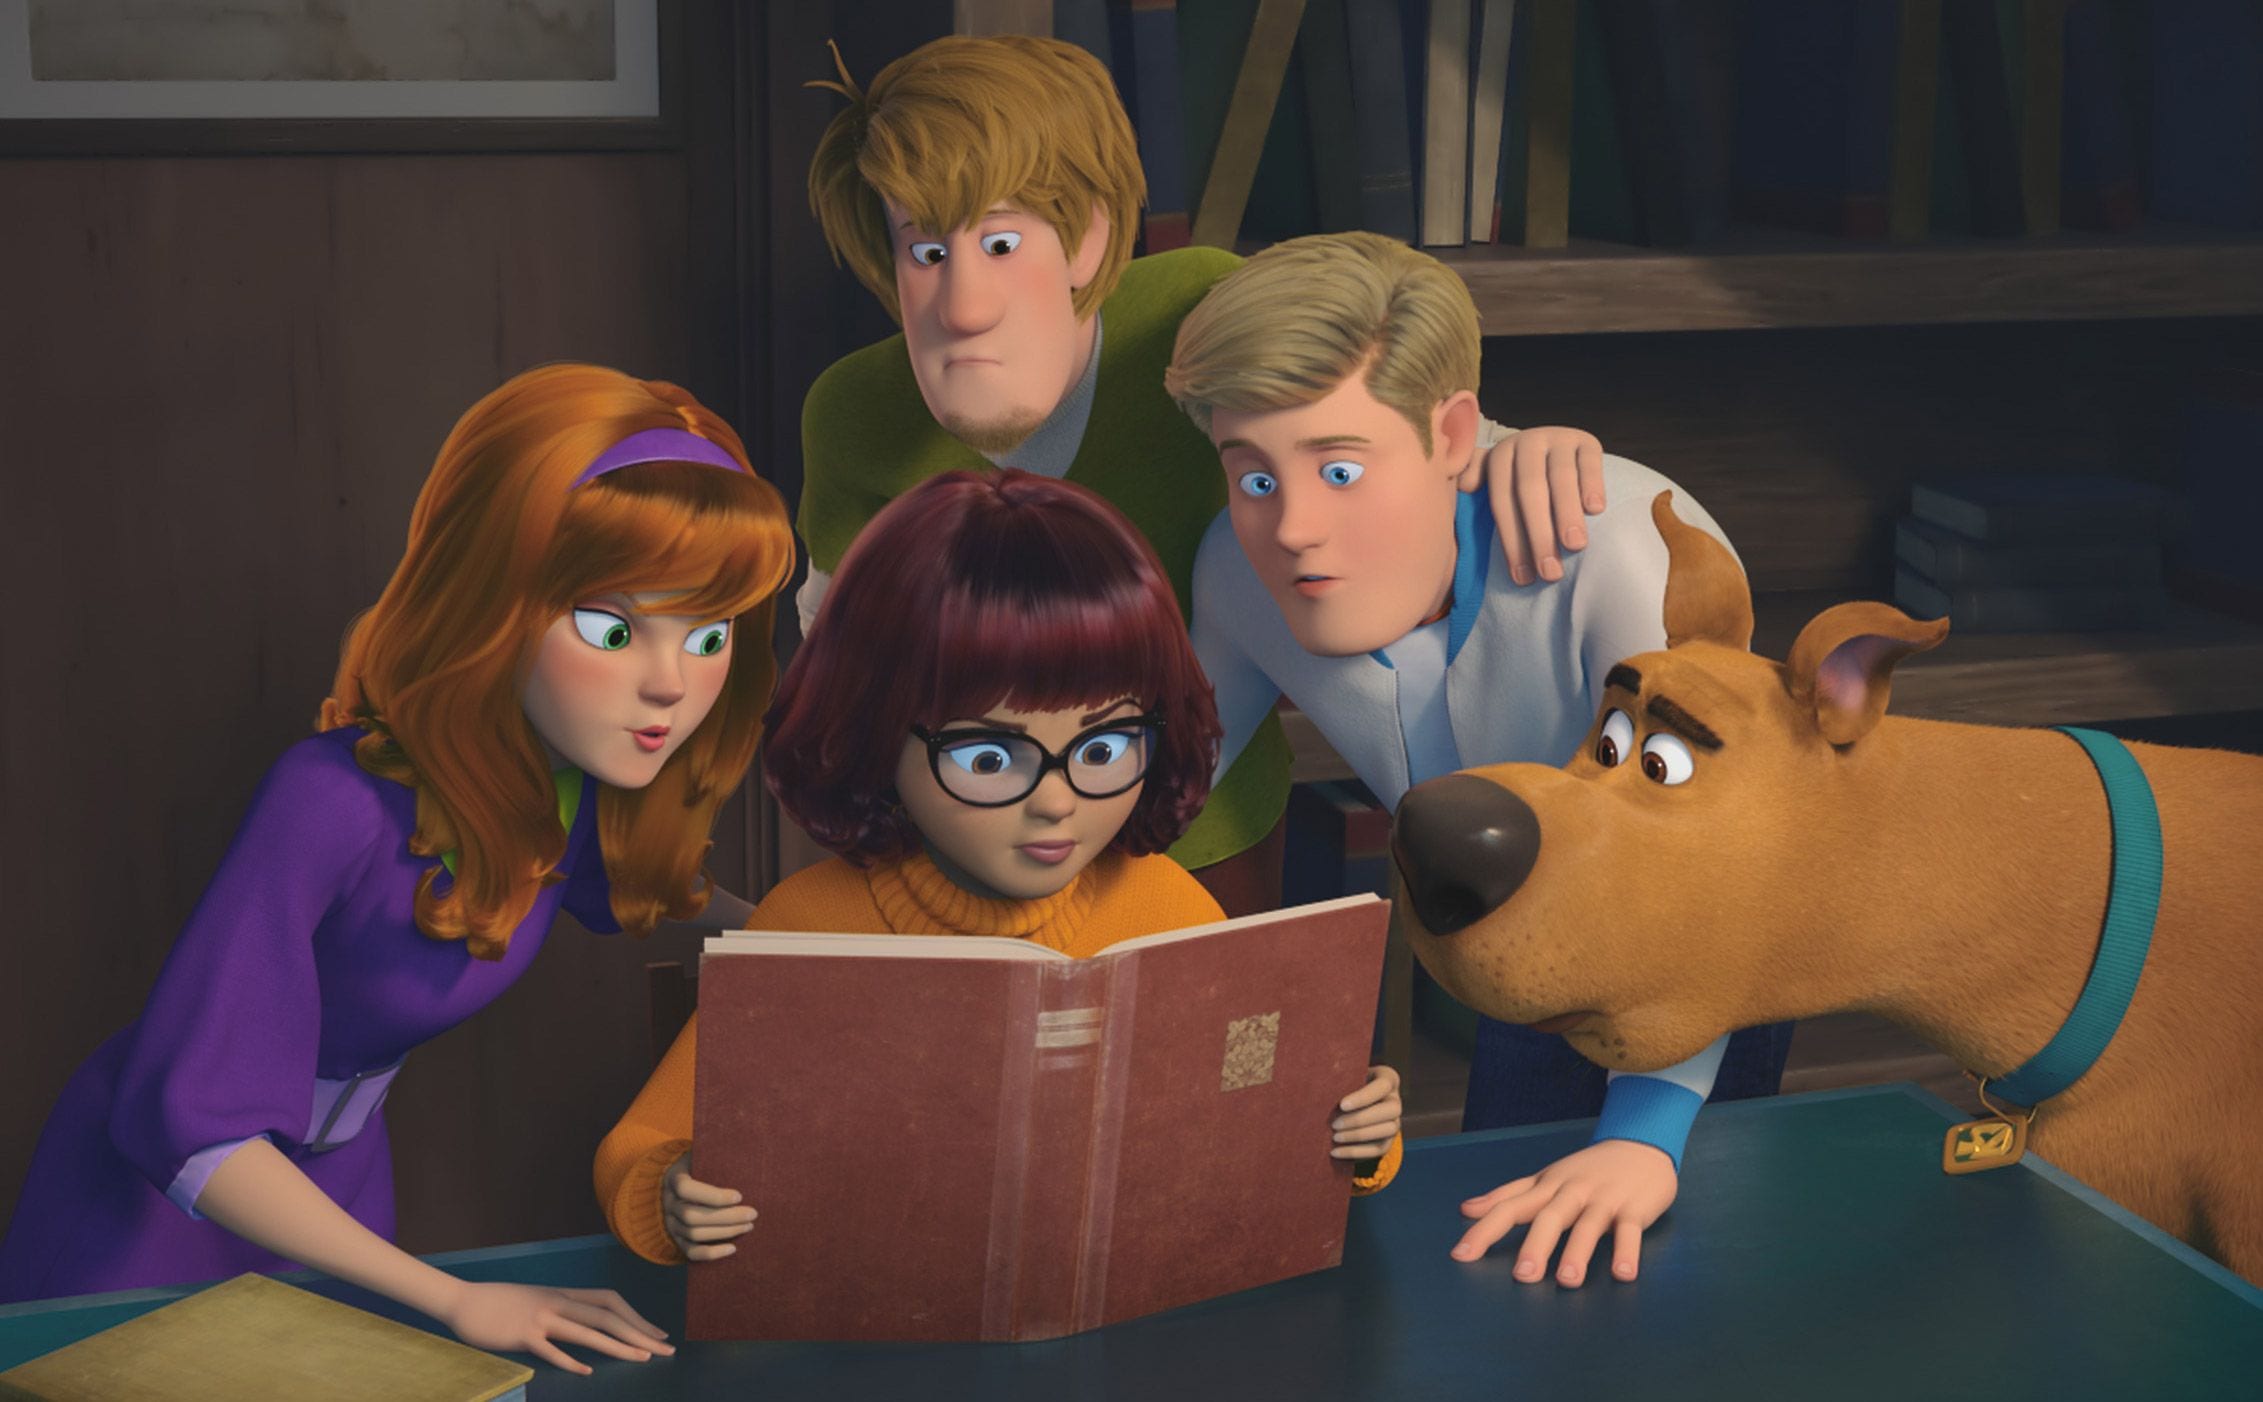 Scooby-Doo: Scoob 2 Reportedly Gets Greenlit For Development